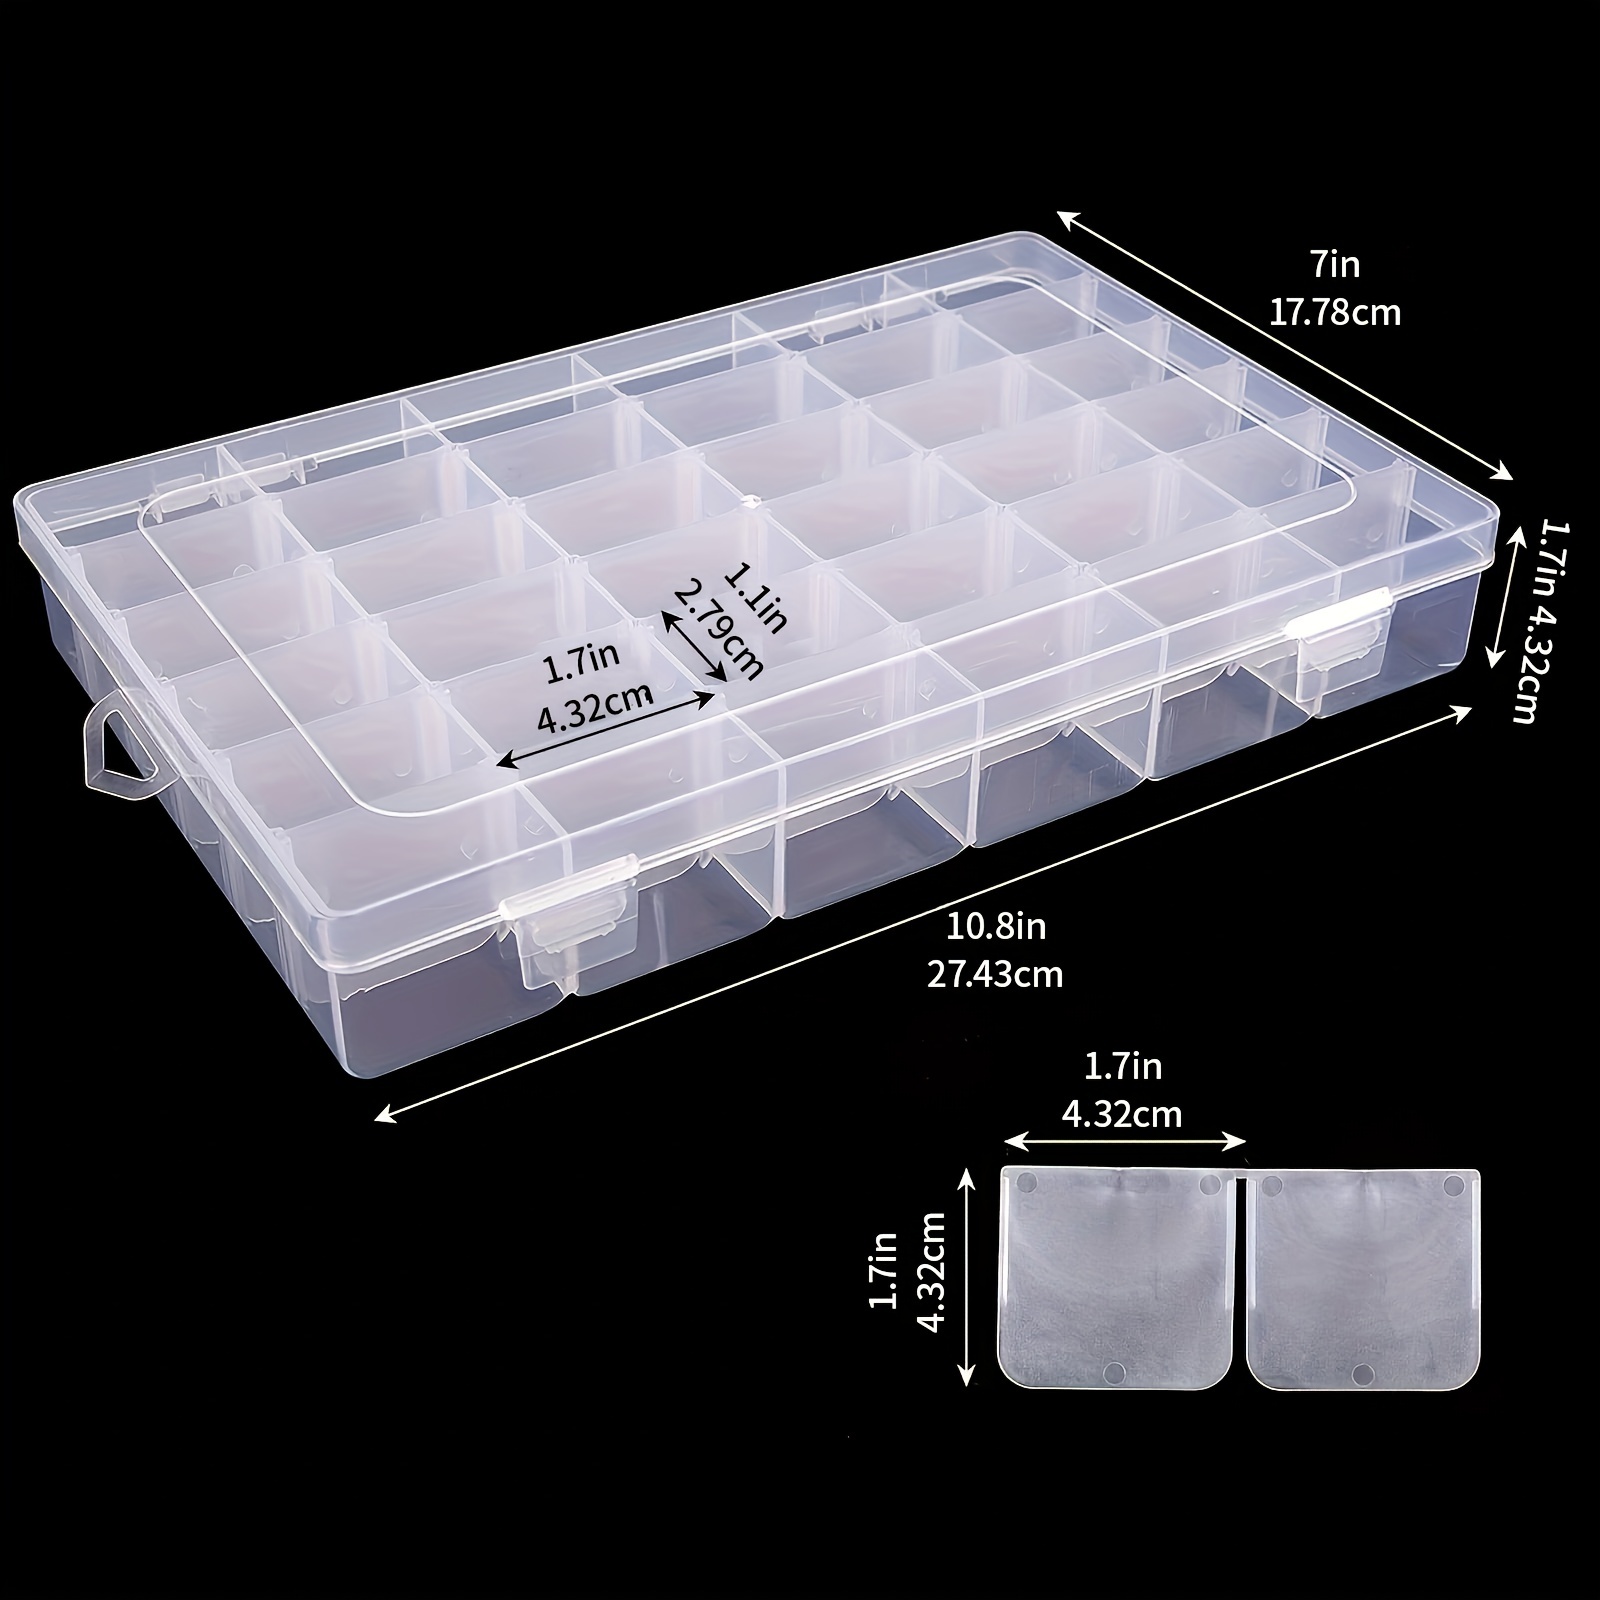 6 Pack: Bead Storage Box with Adjustable Compartments by Bead